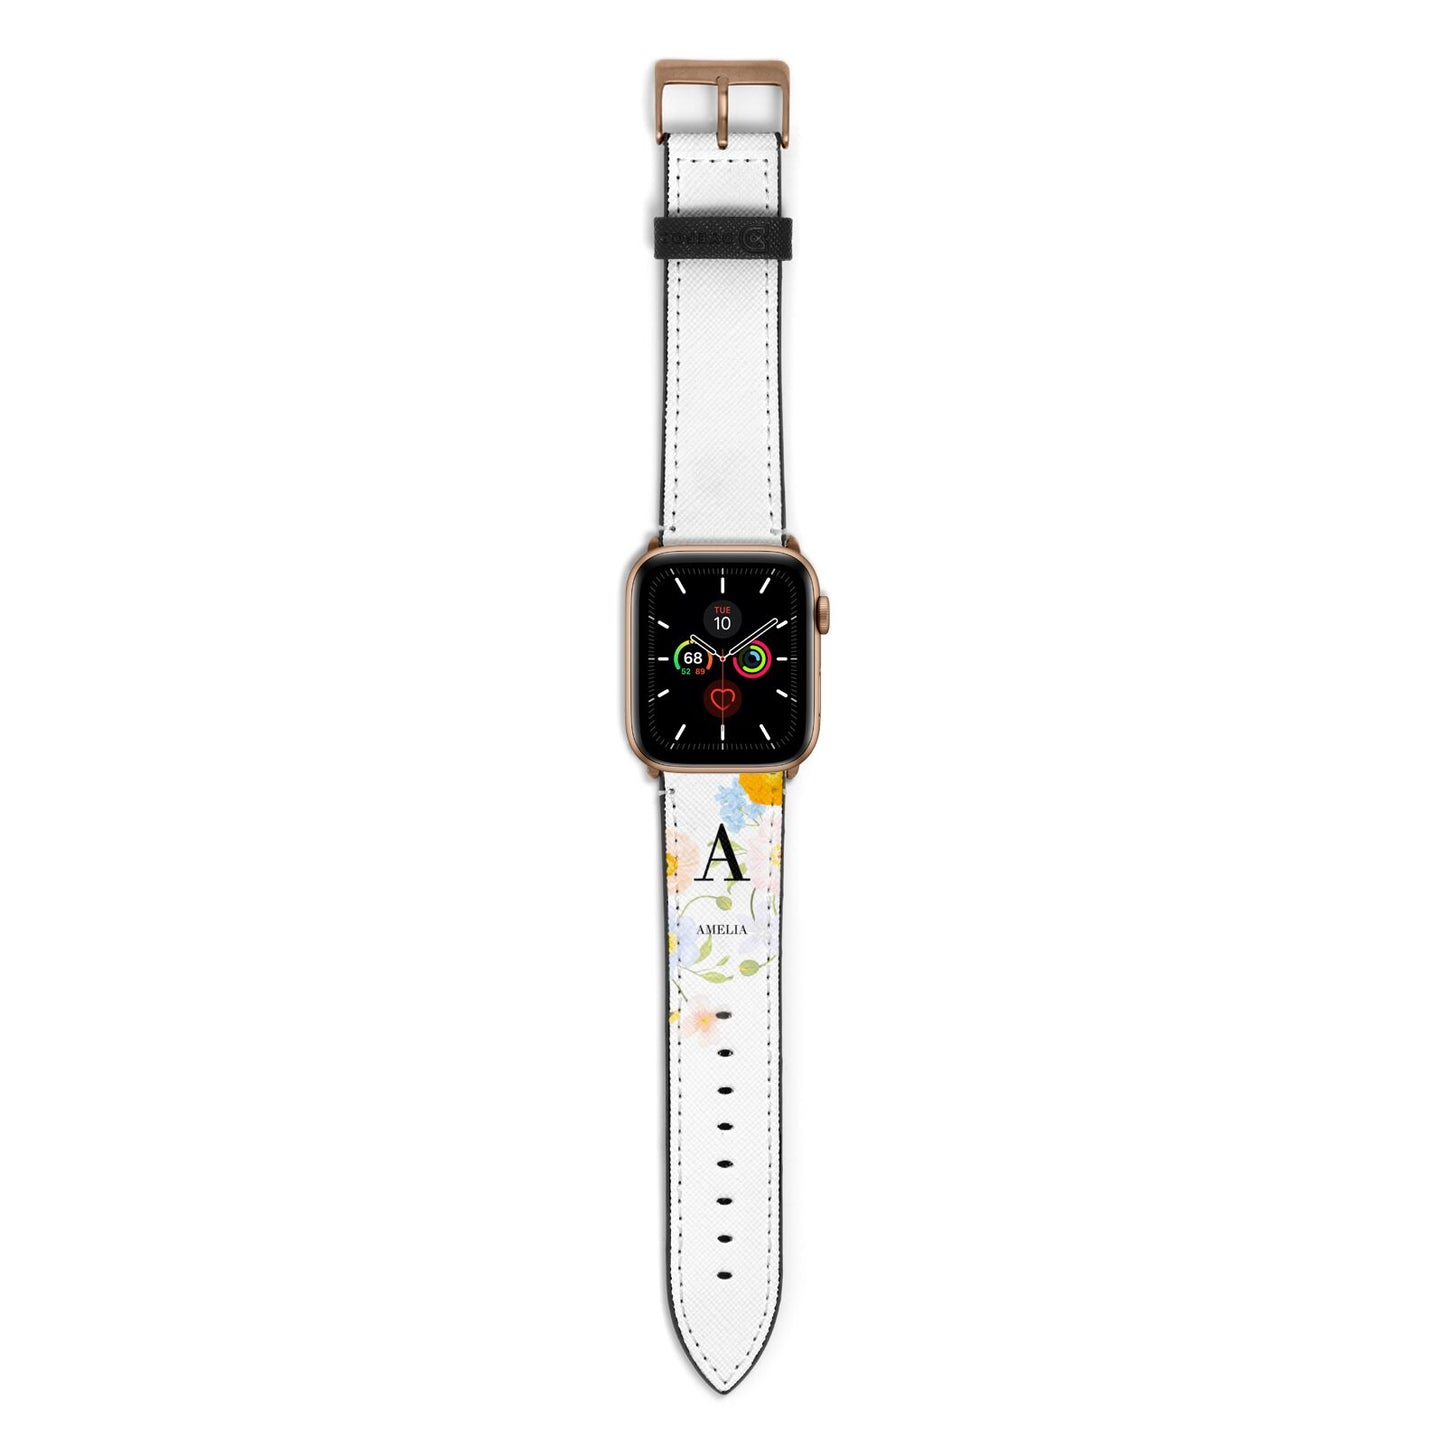 Customised Floral Apple Watch Strap with Gold Hardware